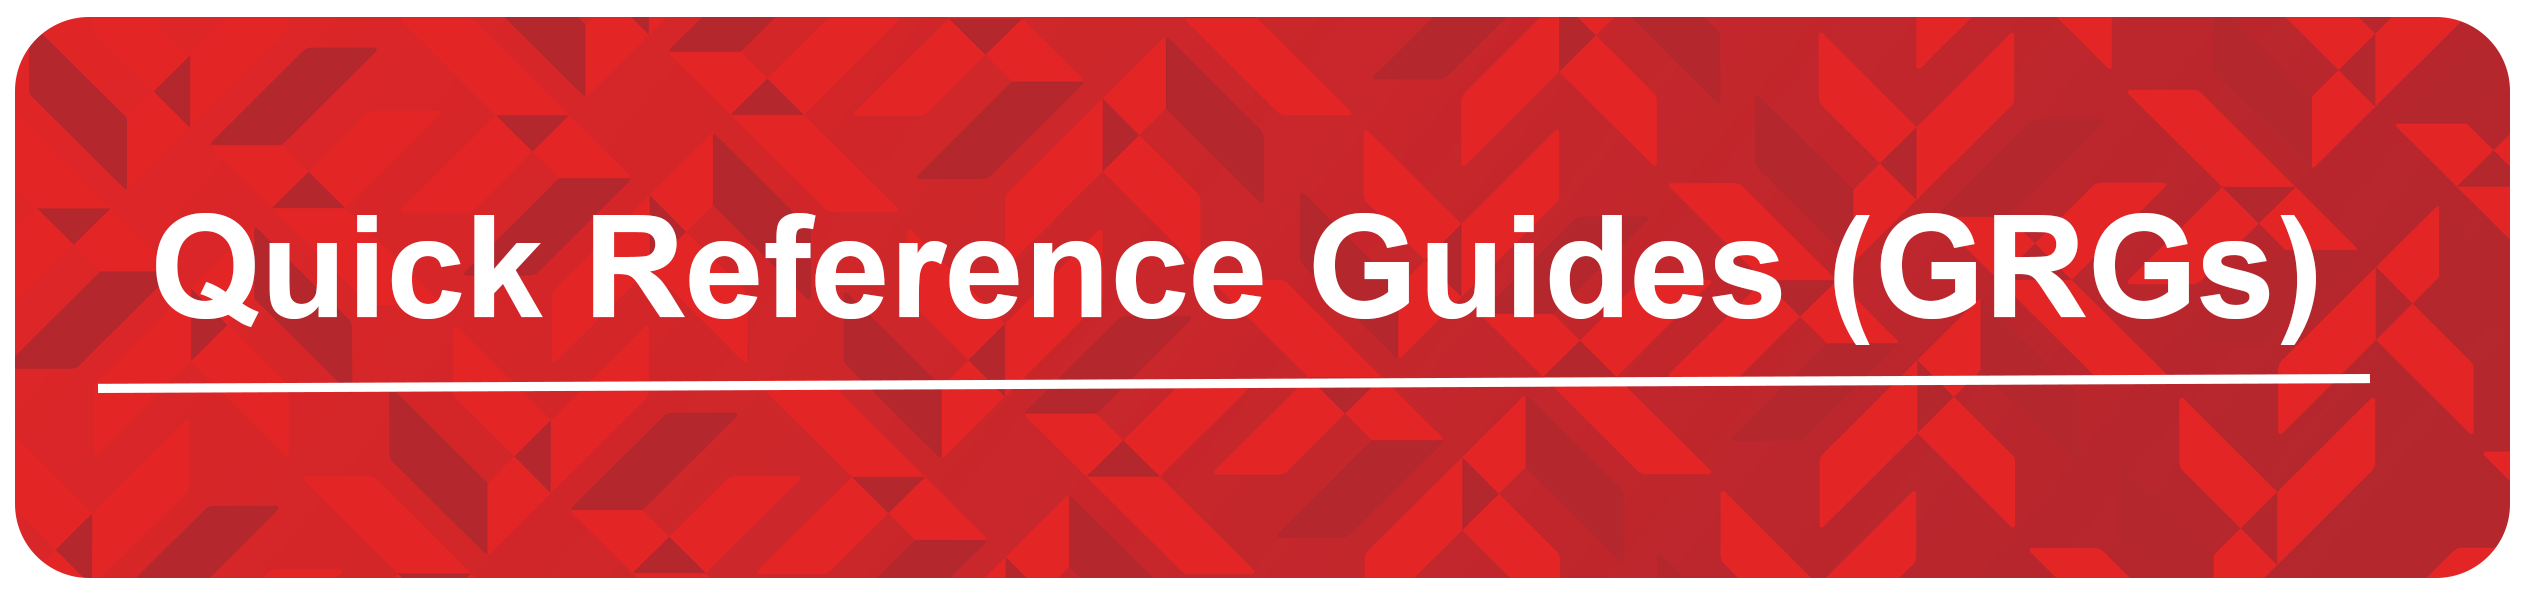 Quick Reference Guides (GRGs)